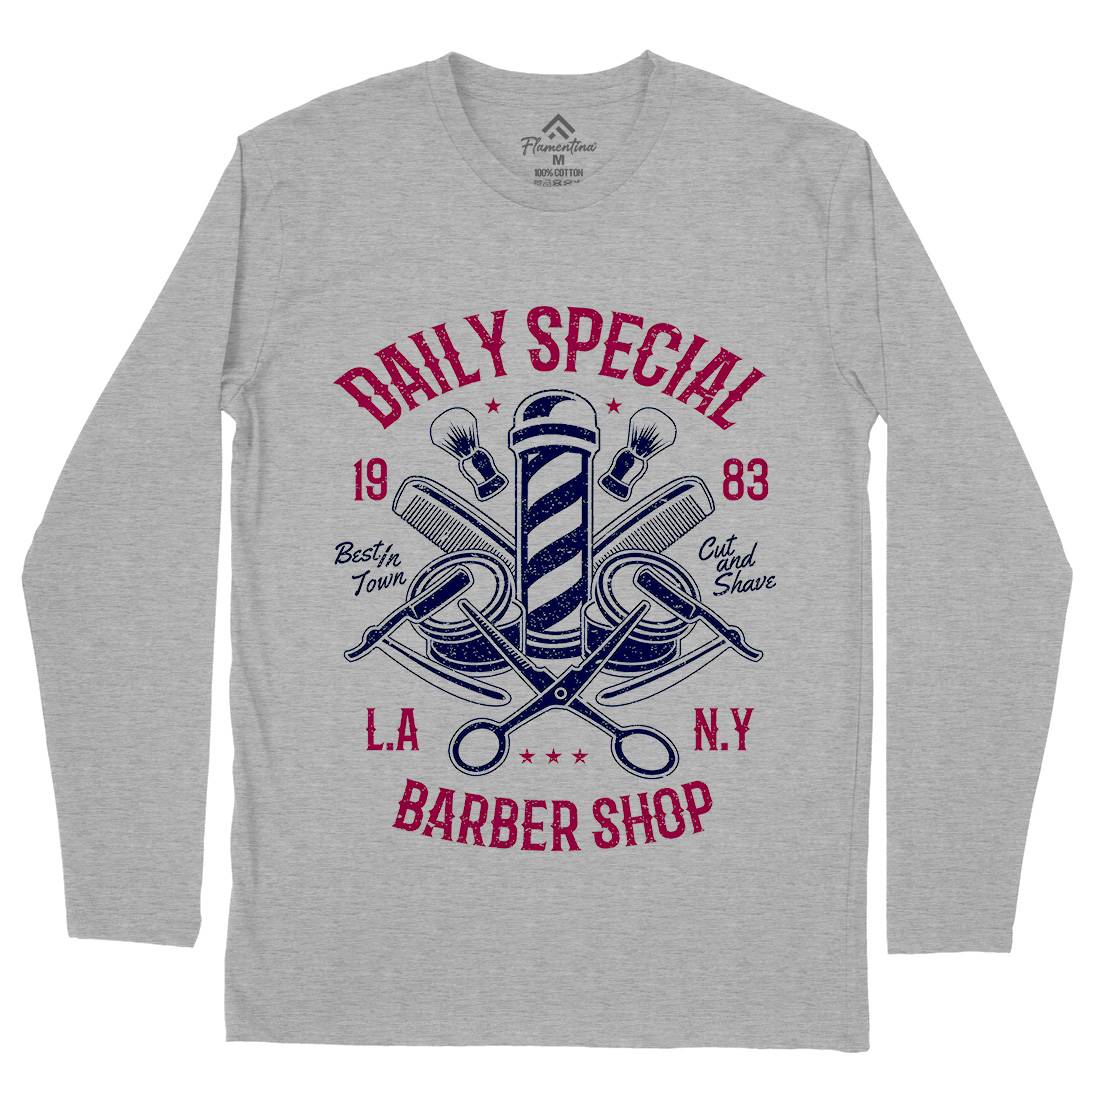 Daily Special Shop Mens Long Sleeve T-Shirt Barber A041